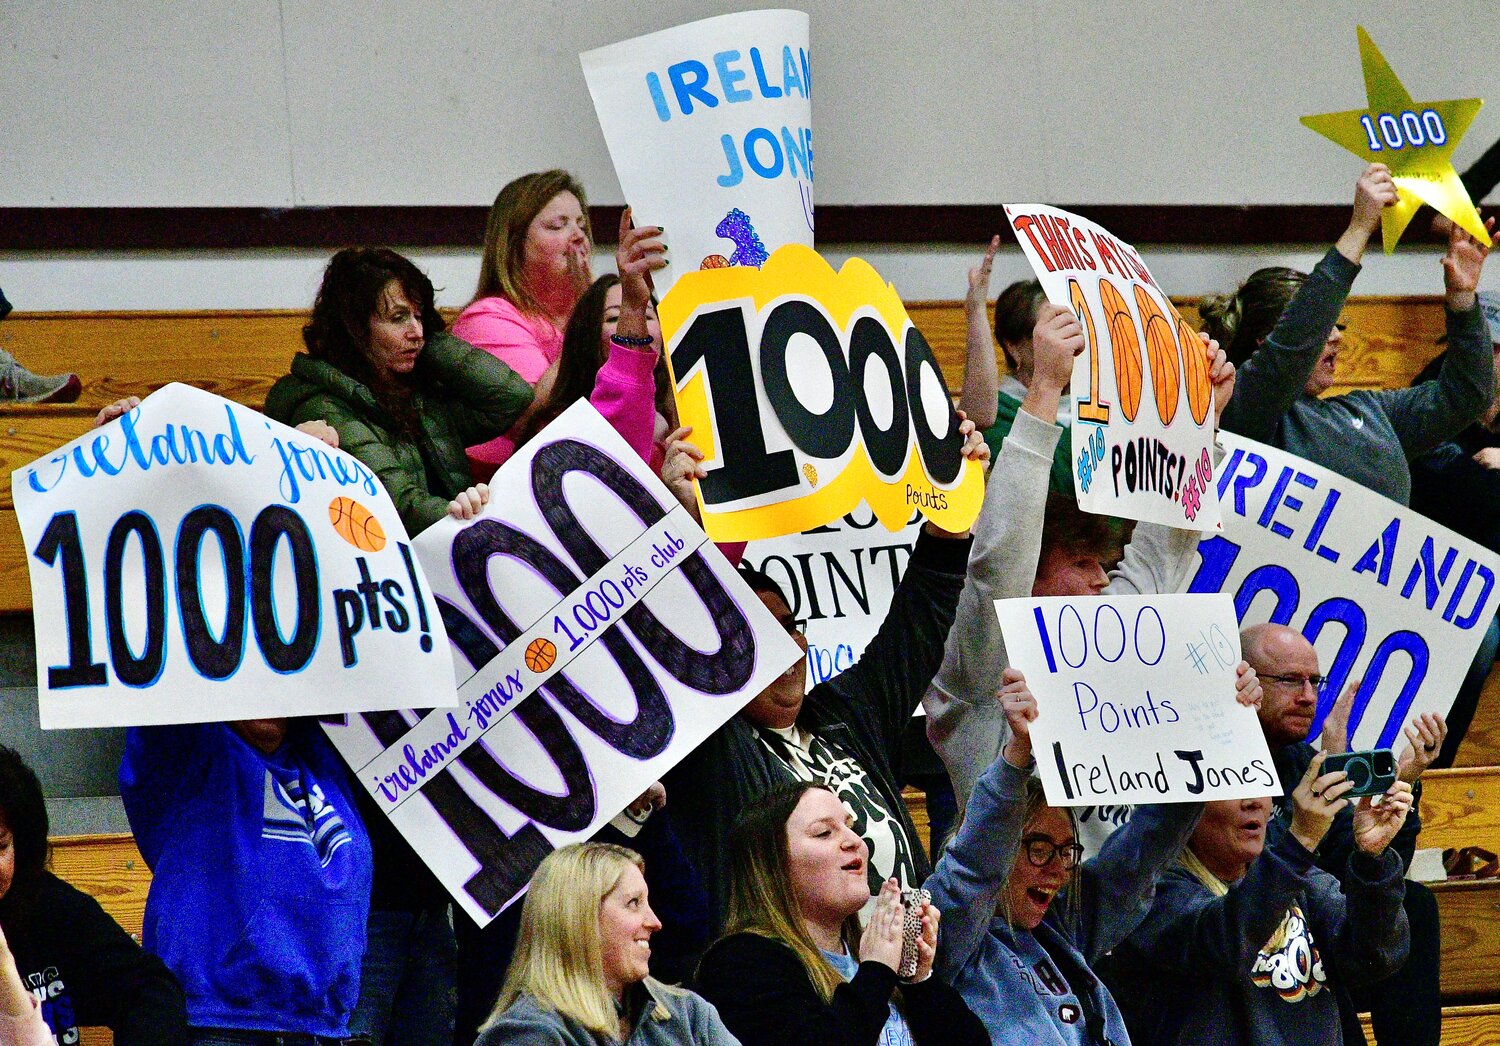 CLEVER FANS hold up posters celebrating Ireland Jones' 1,000th point.